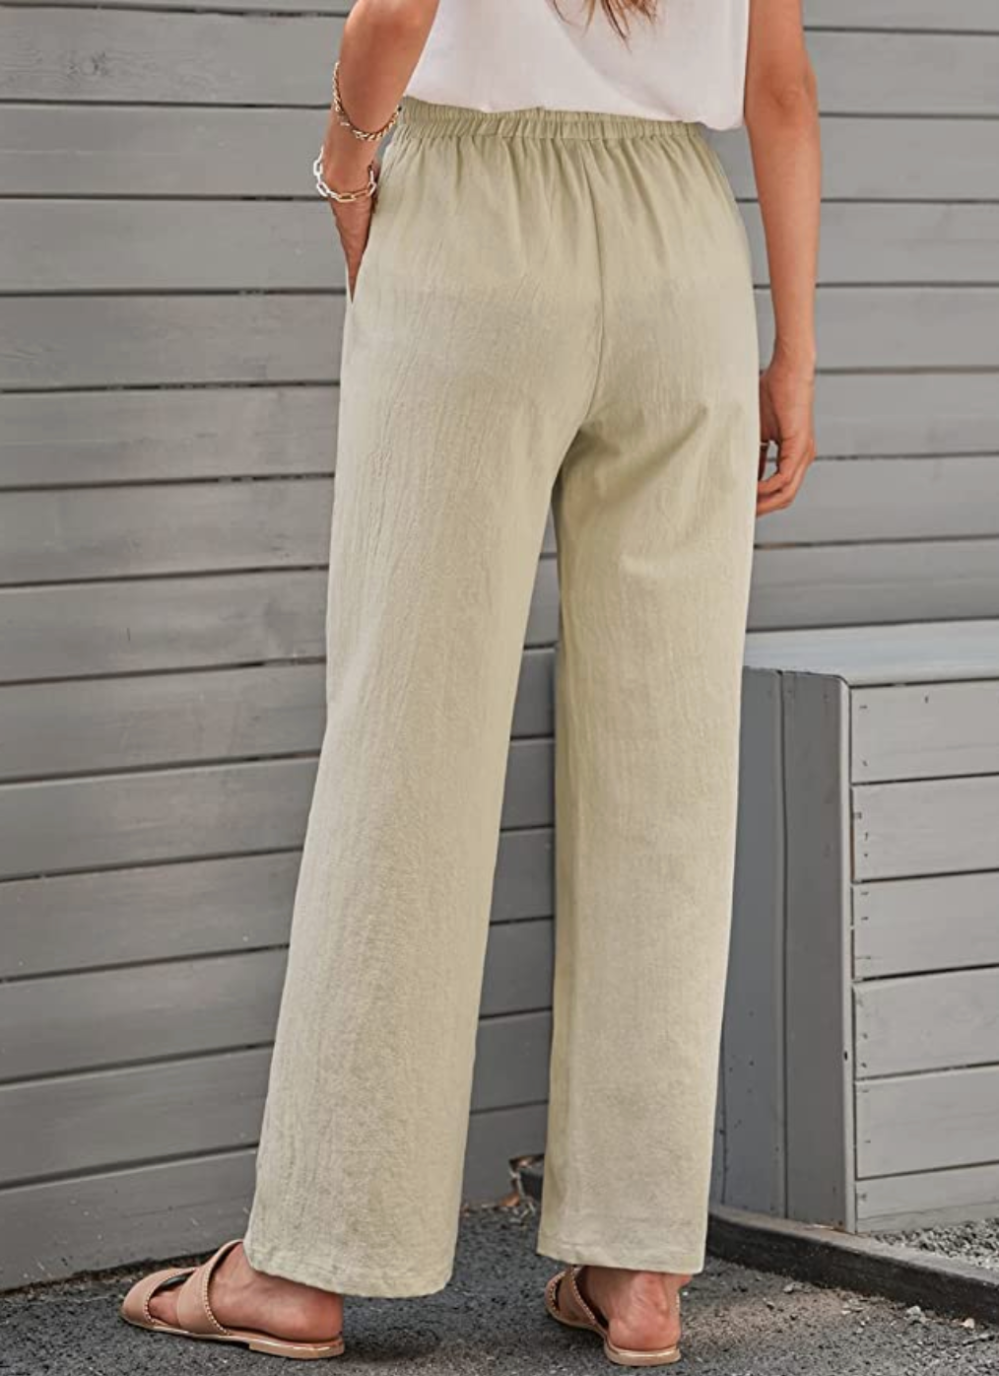 EVALESS Casual High Waisted Pants